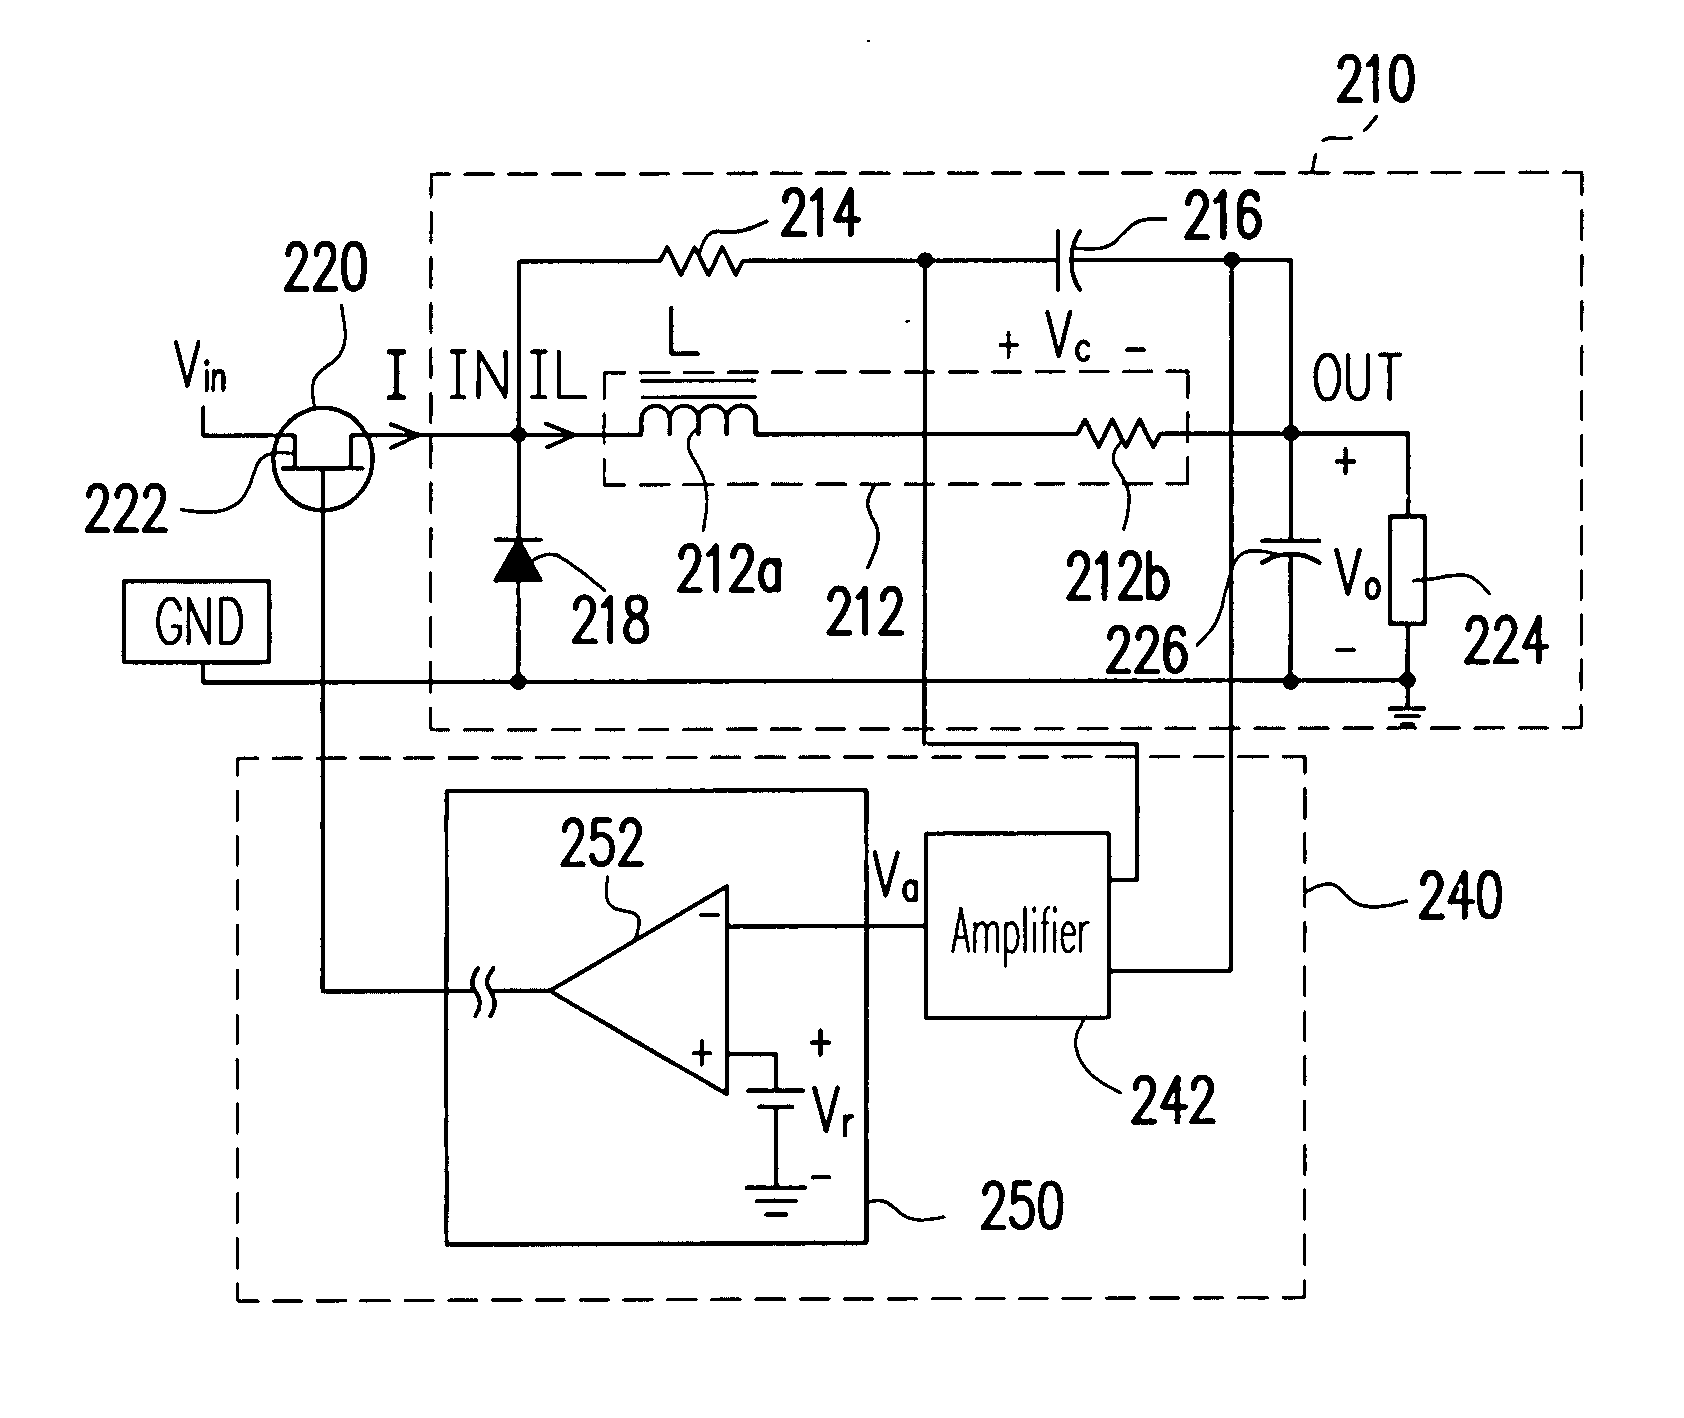 Current-limited protection circuit of switching power converter